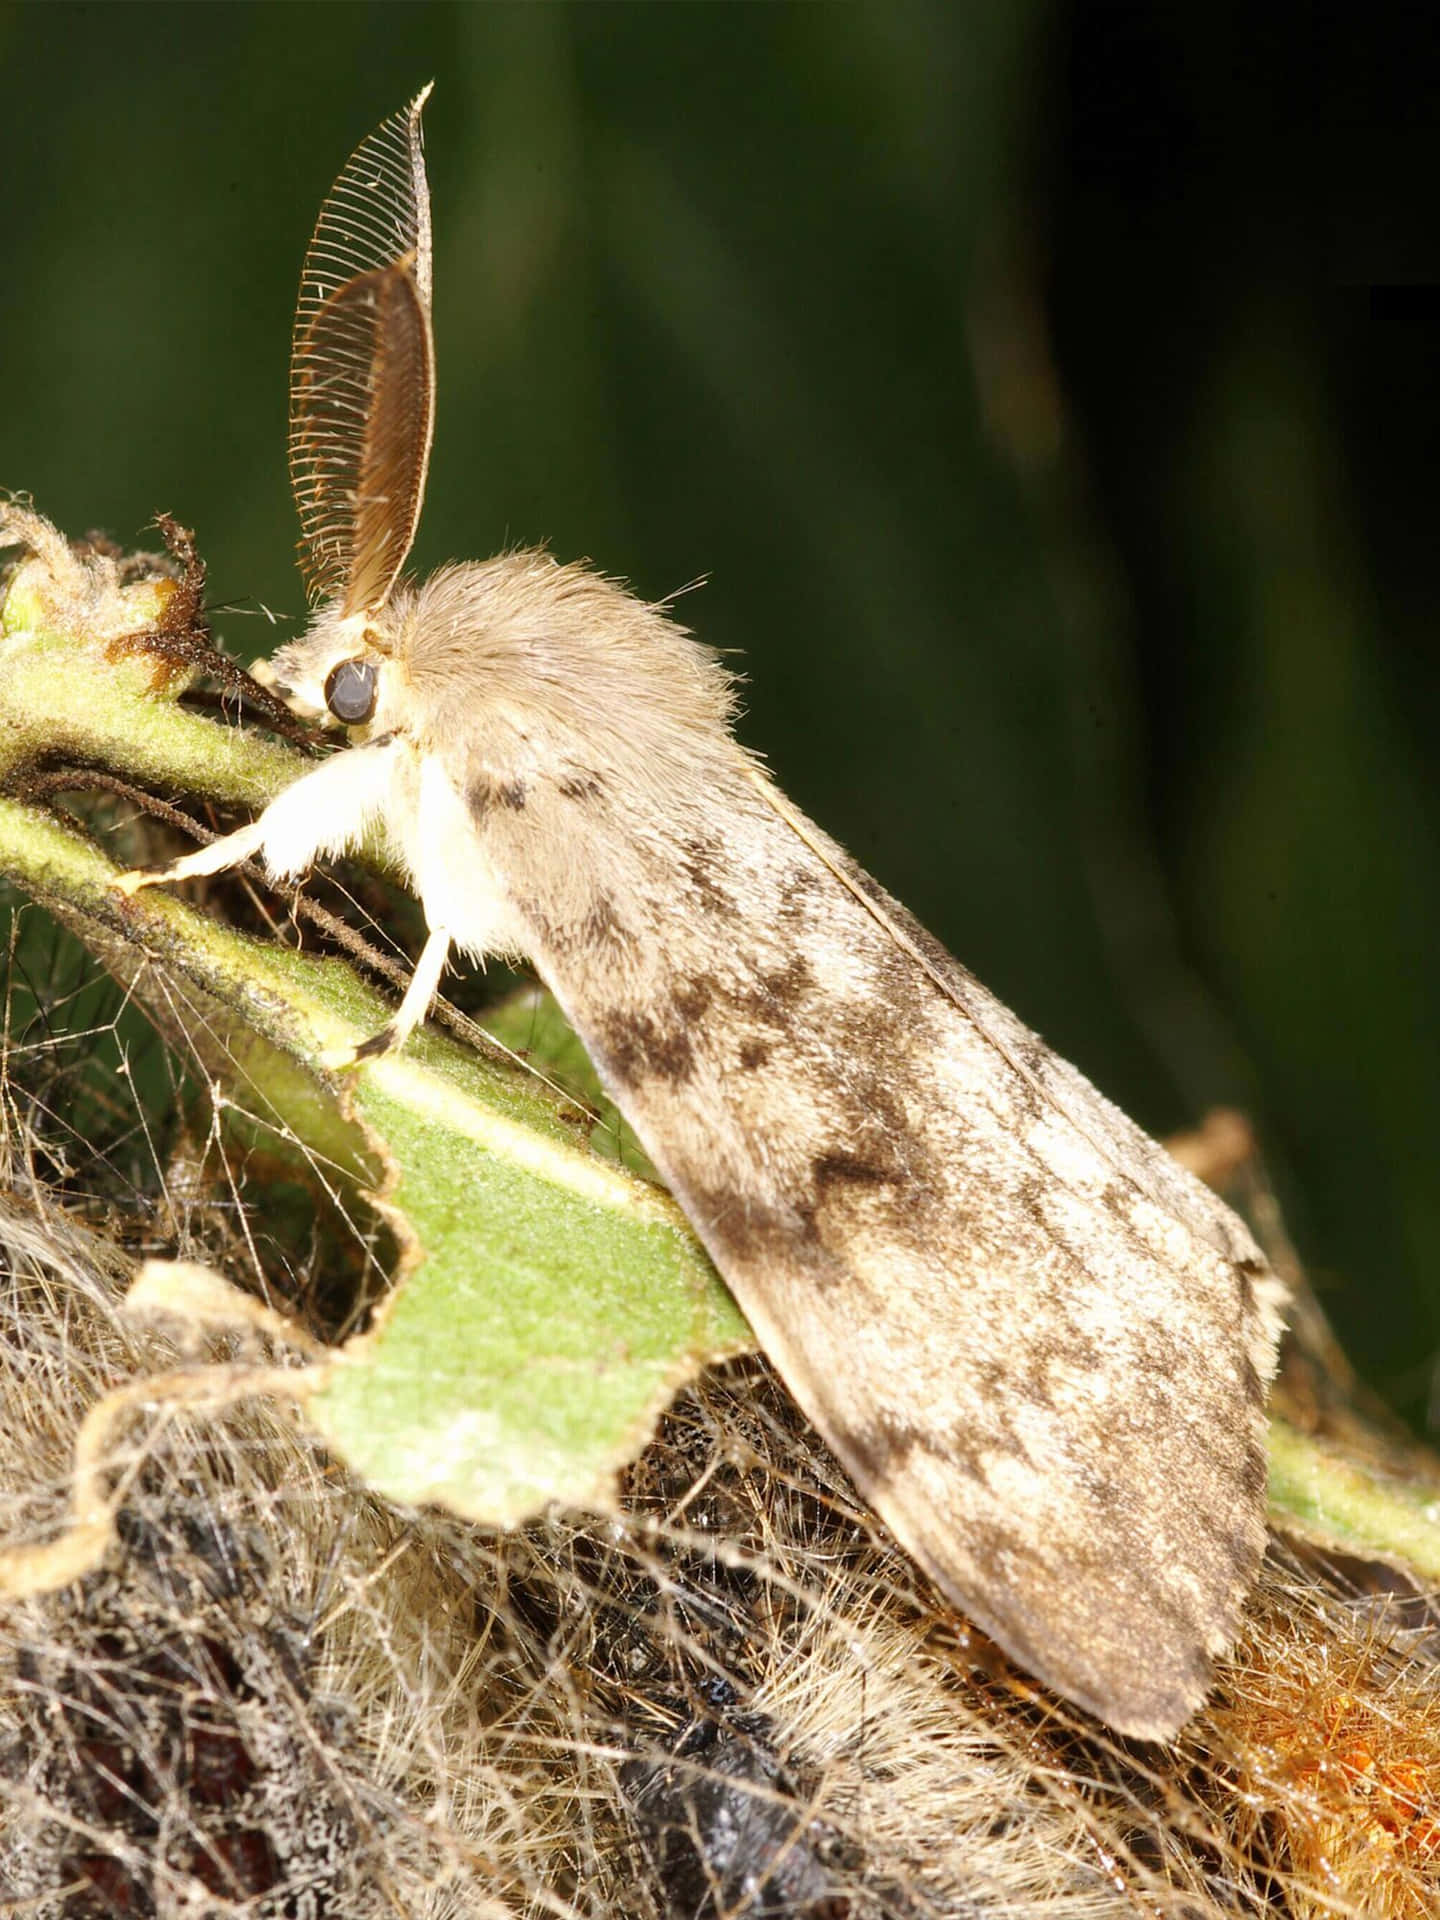 A close-up of a Brown House Moth